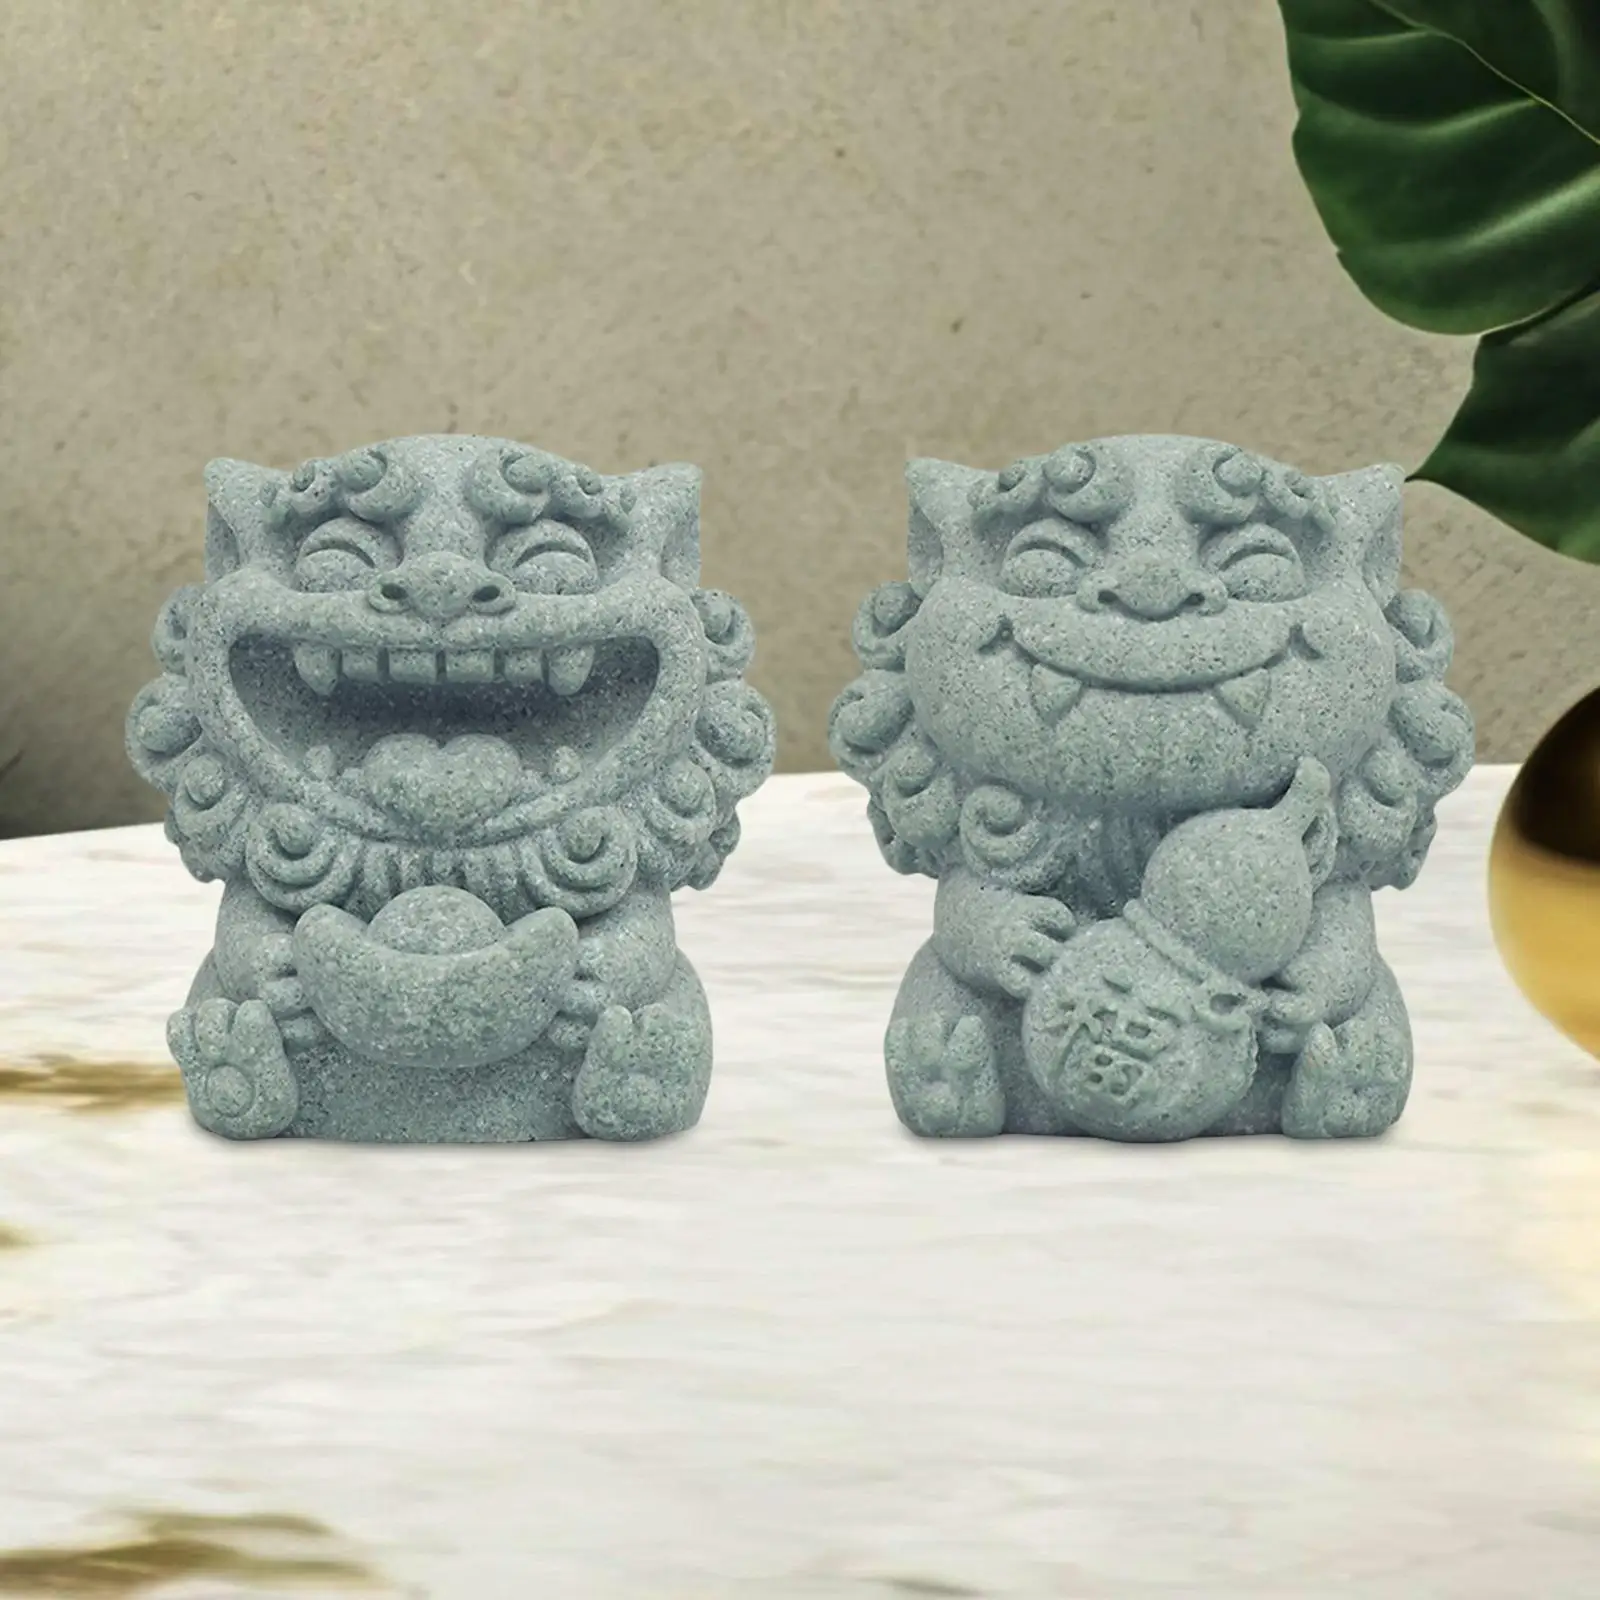 2x Mini Lion Statue Figurine Chinese Figurine Stone Sculpture Carving for Dollhouse Miniature Tabletop Entryway Garden Bedroom